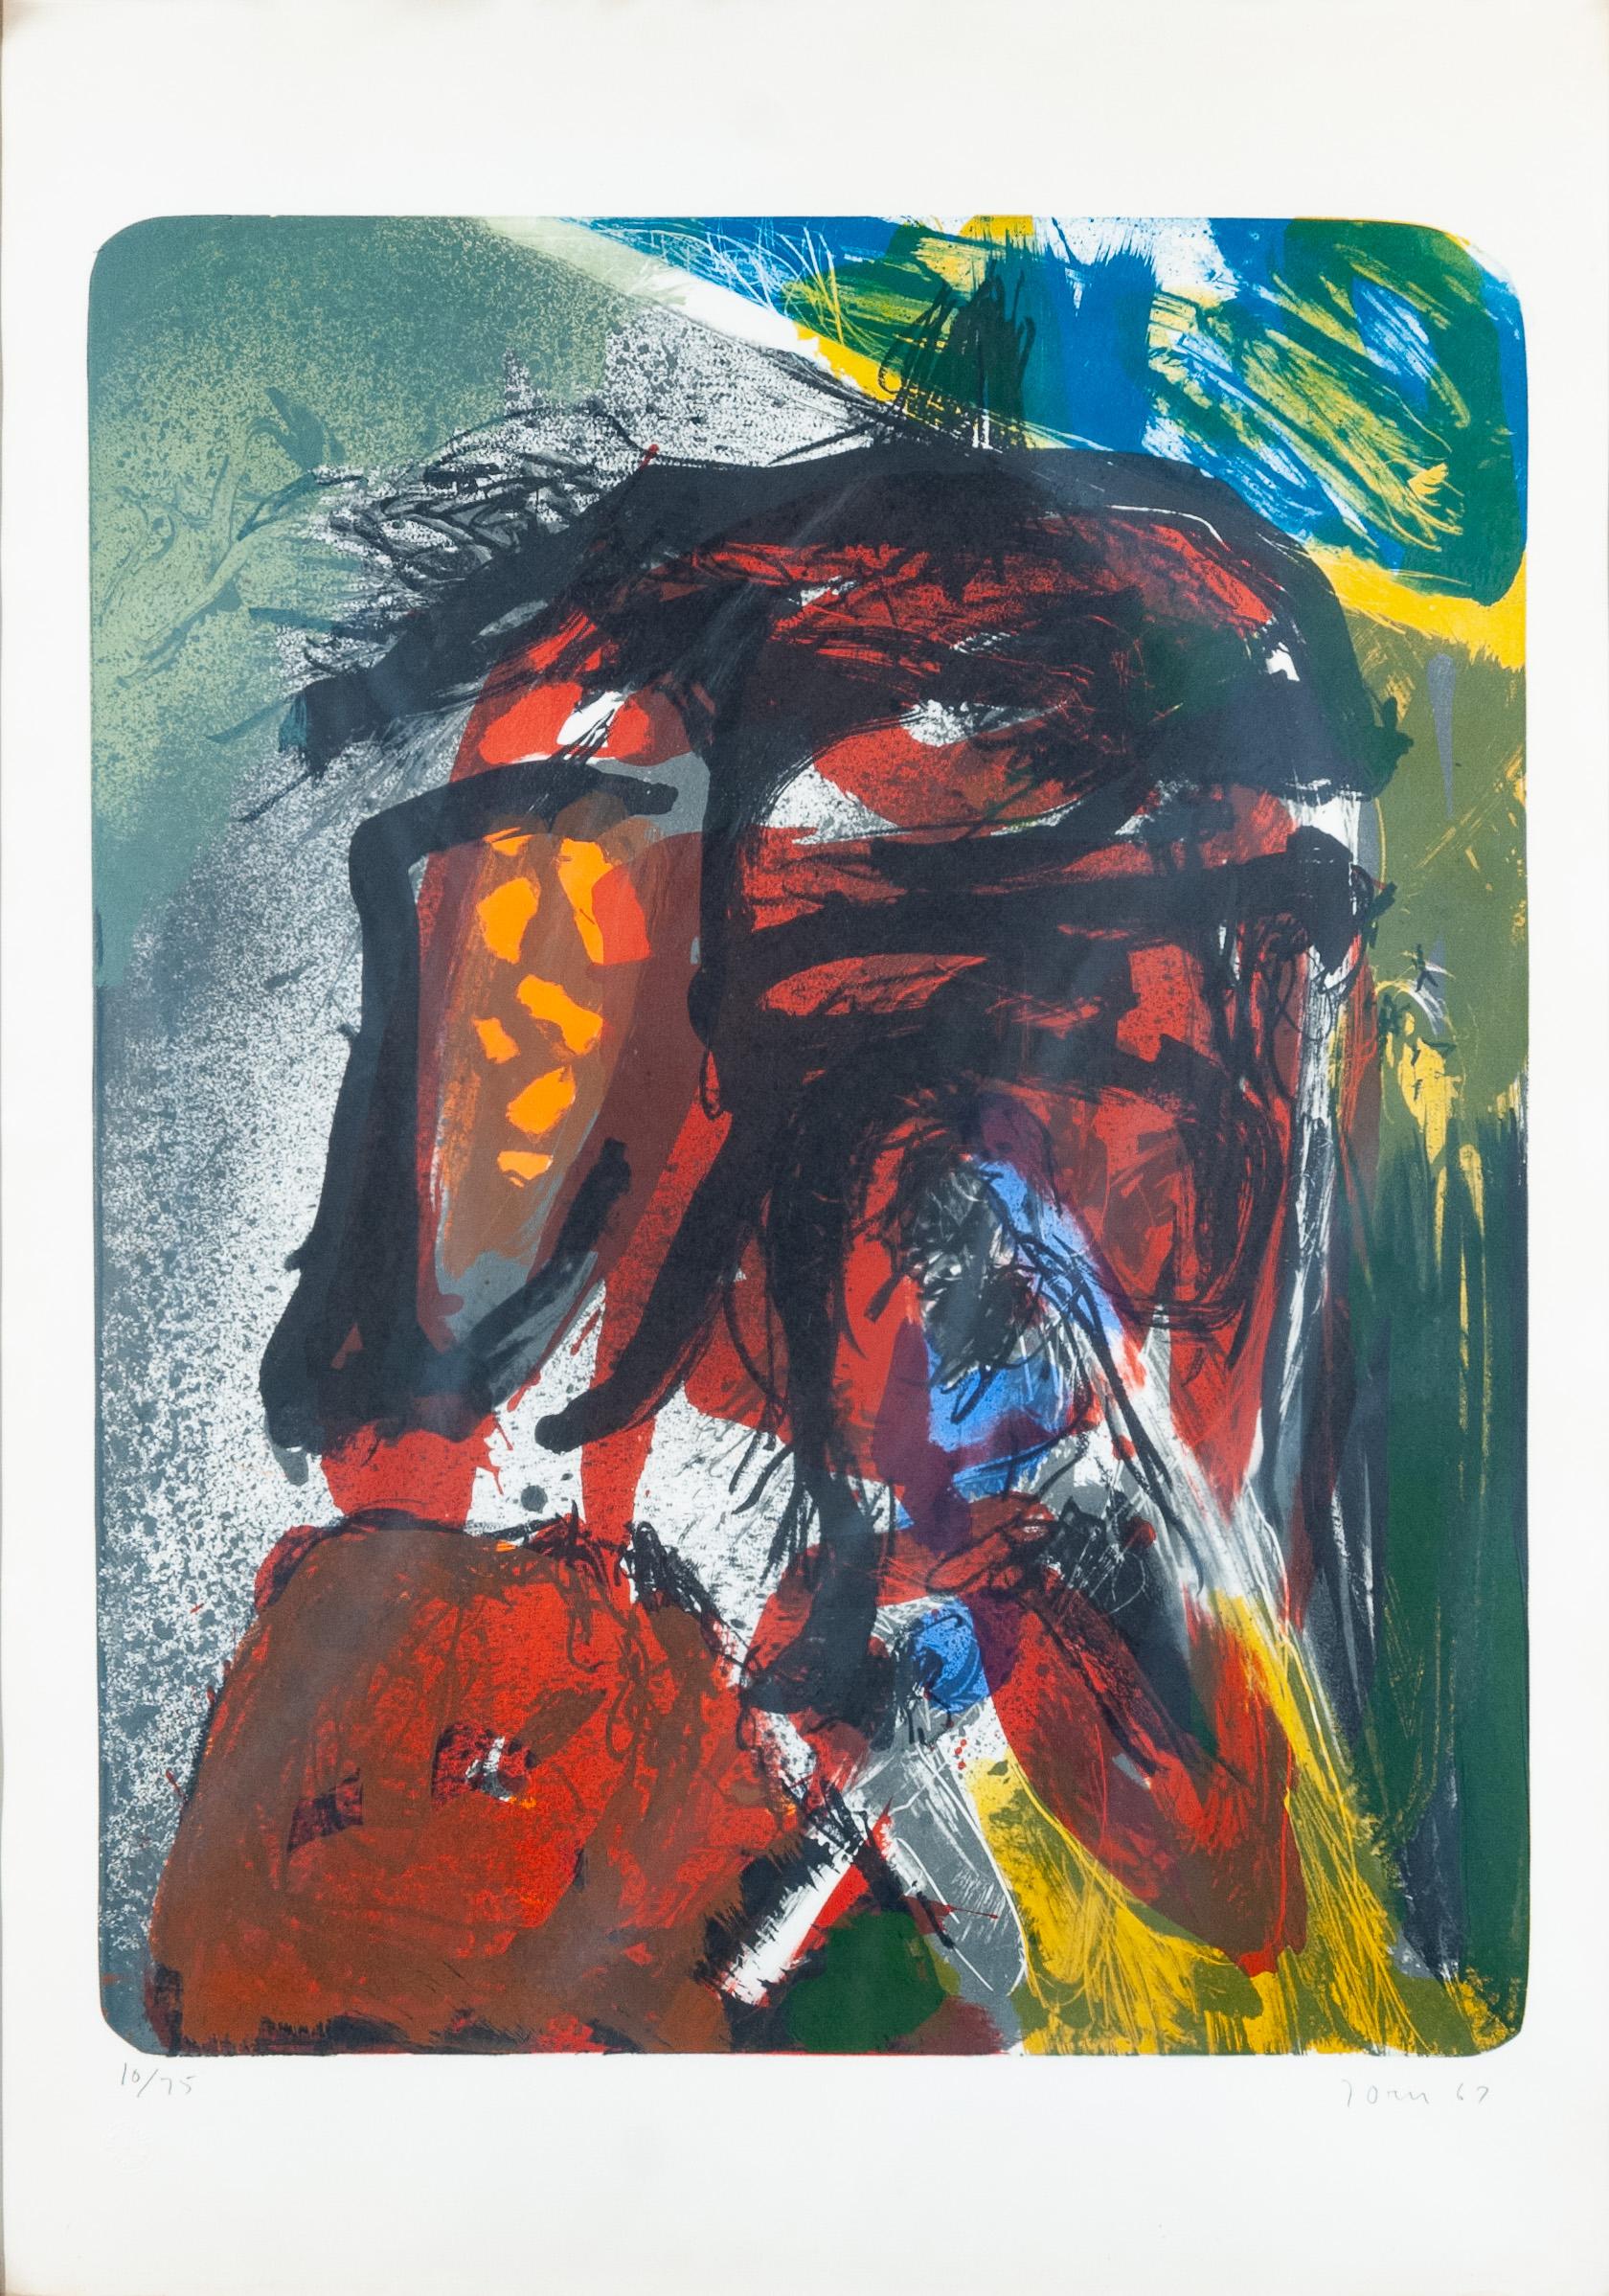 Asger Jorn Abstract Print - Composition from the series "Von Kopf bis Fuss" (1967) litograph in color 10/75